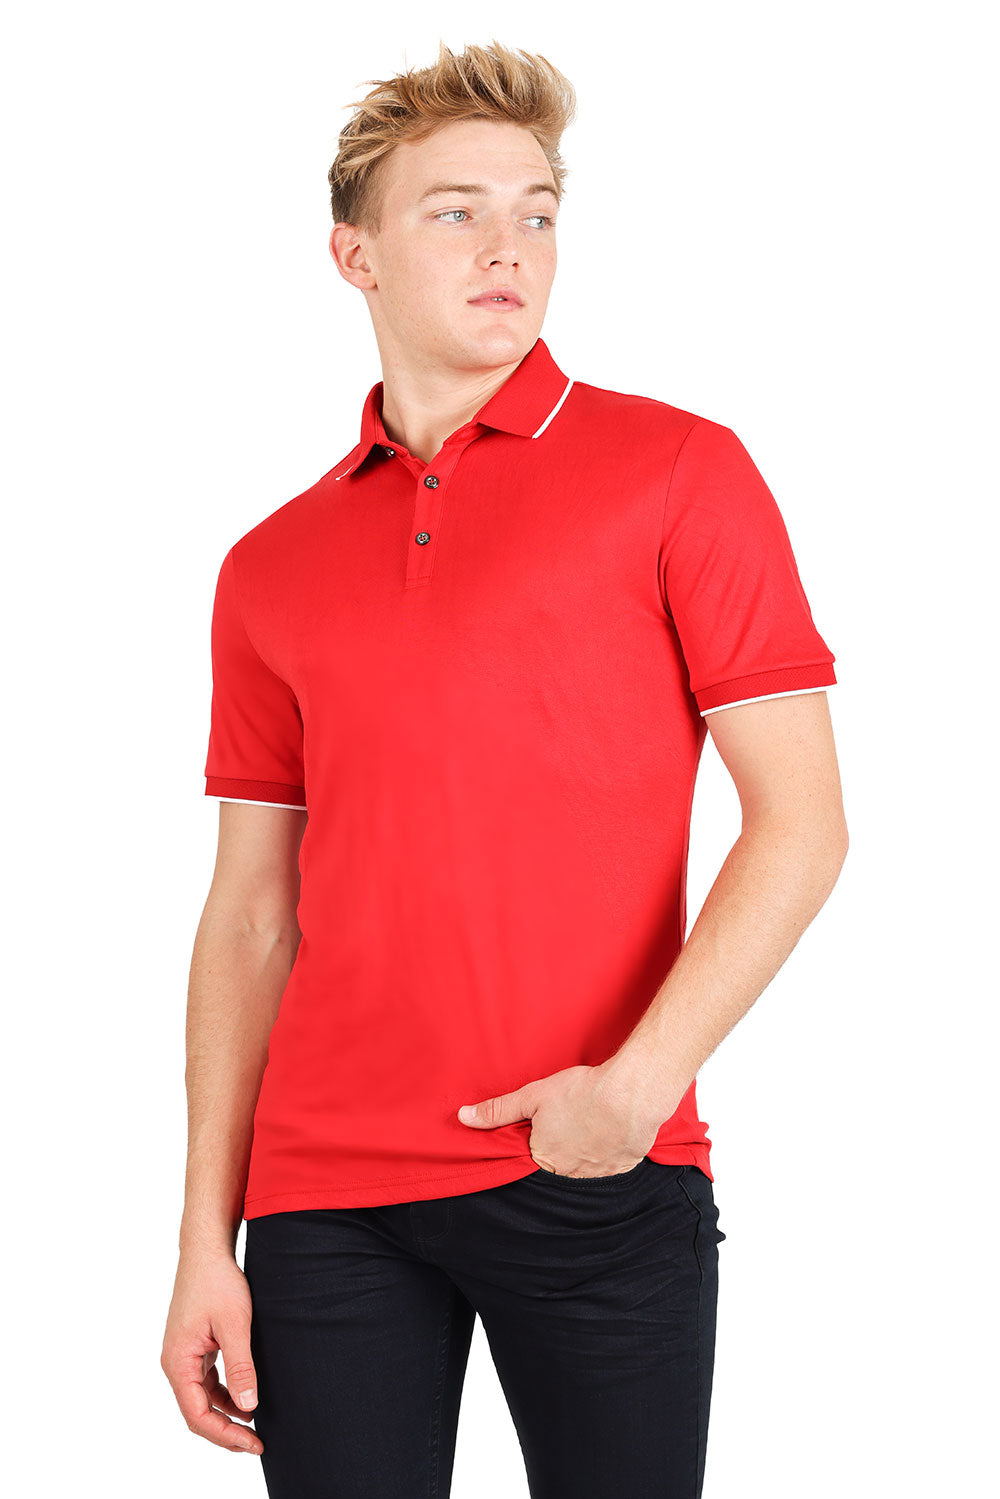 Barabas Men's Solid Color Luxury Short Sleeves Polo Shirts 2PP825 Red